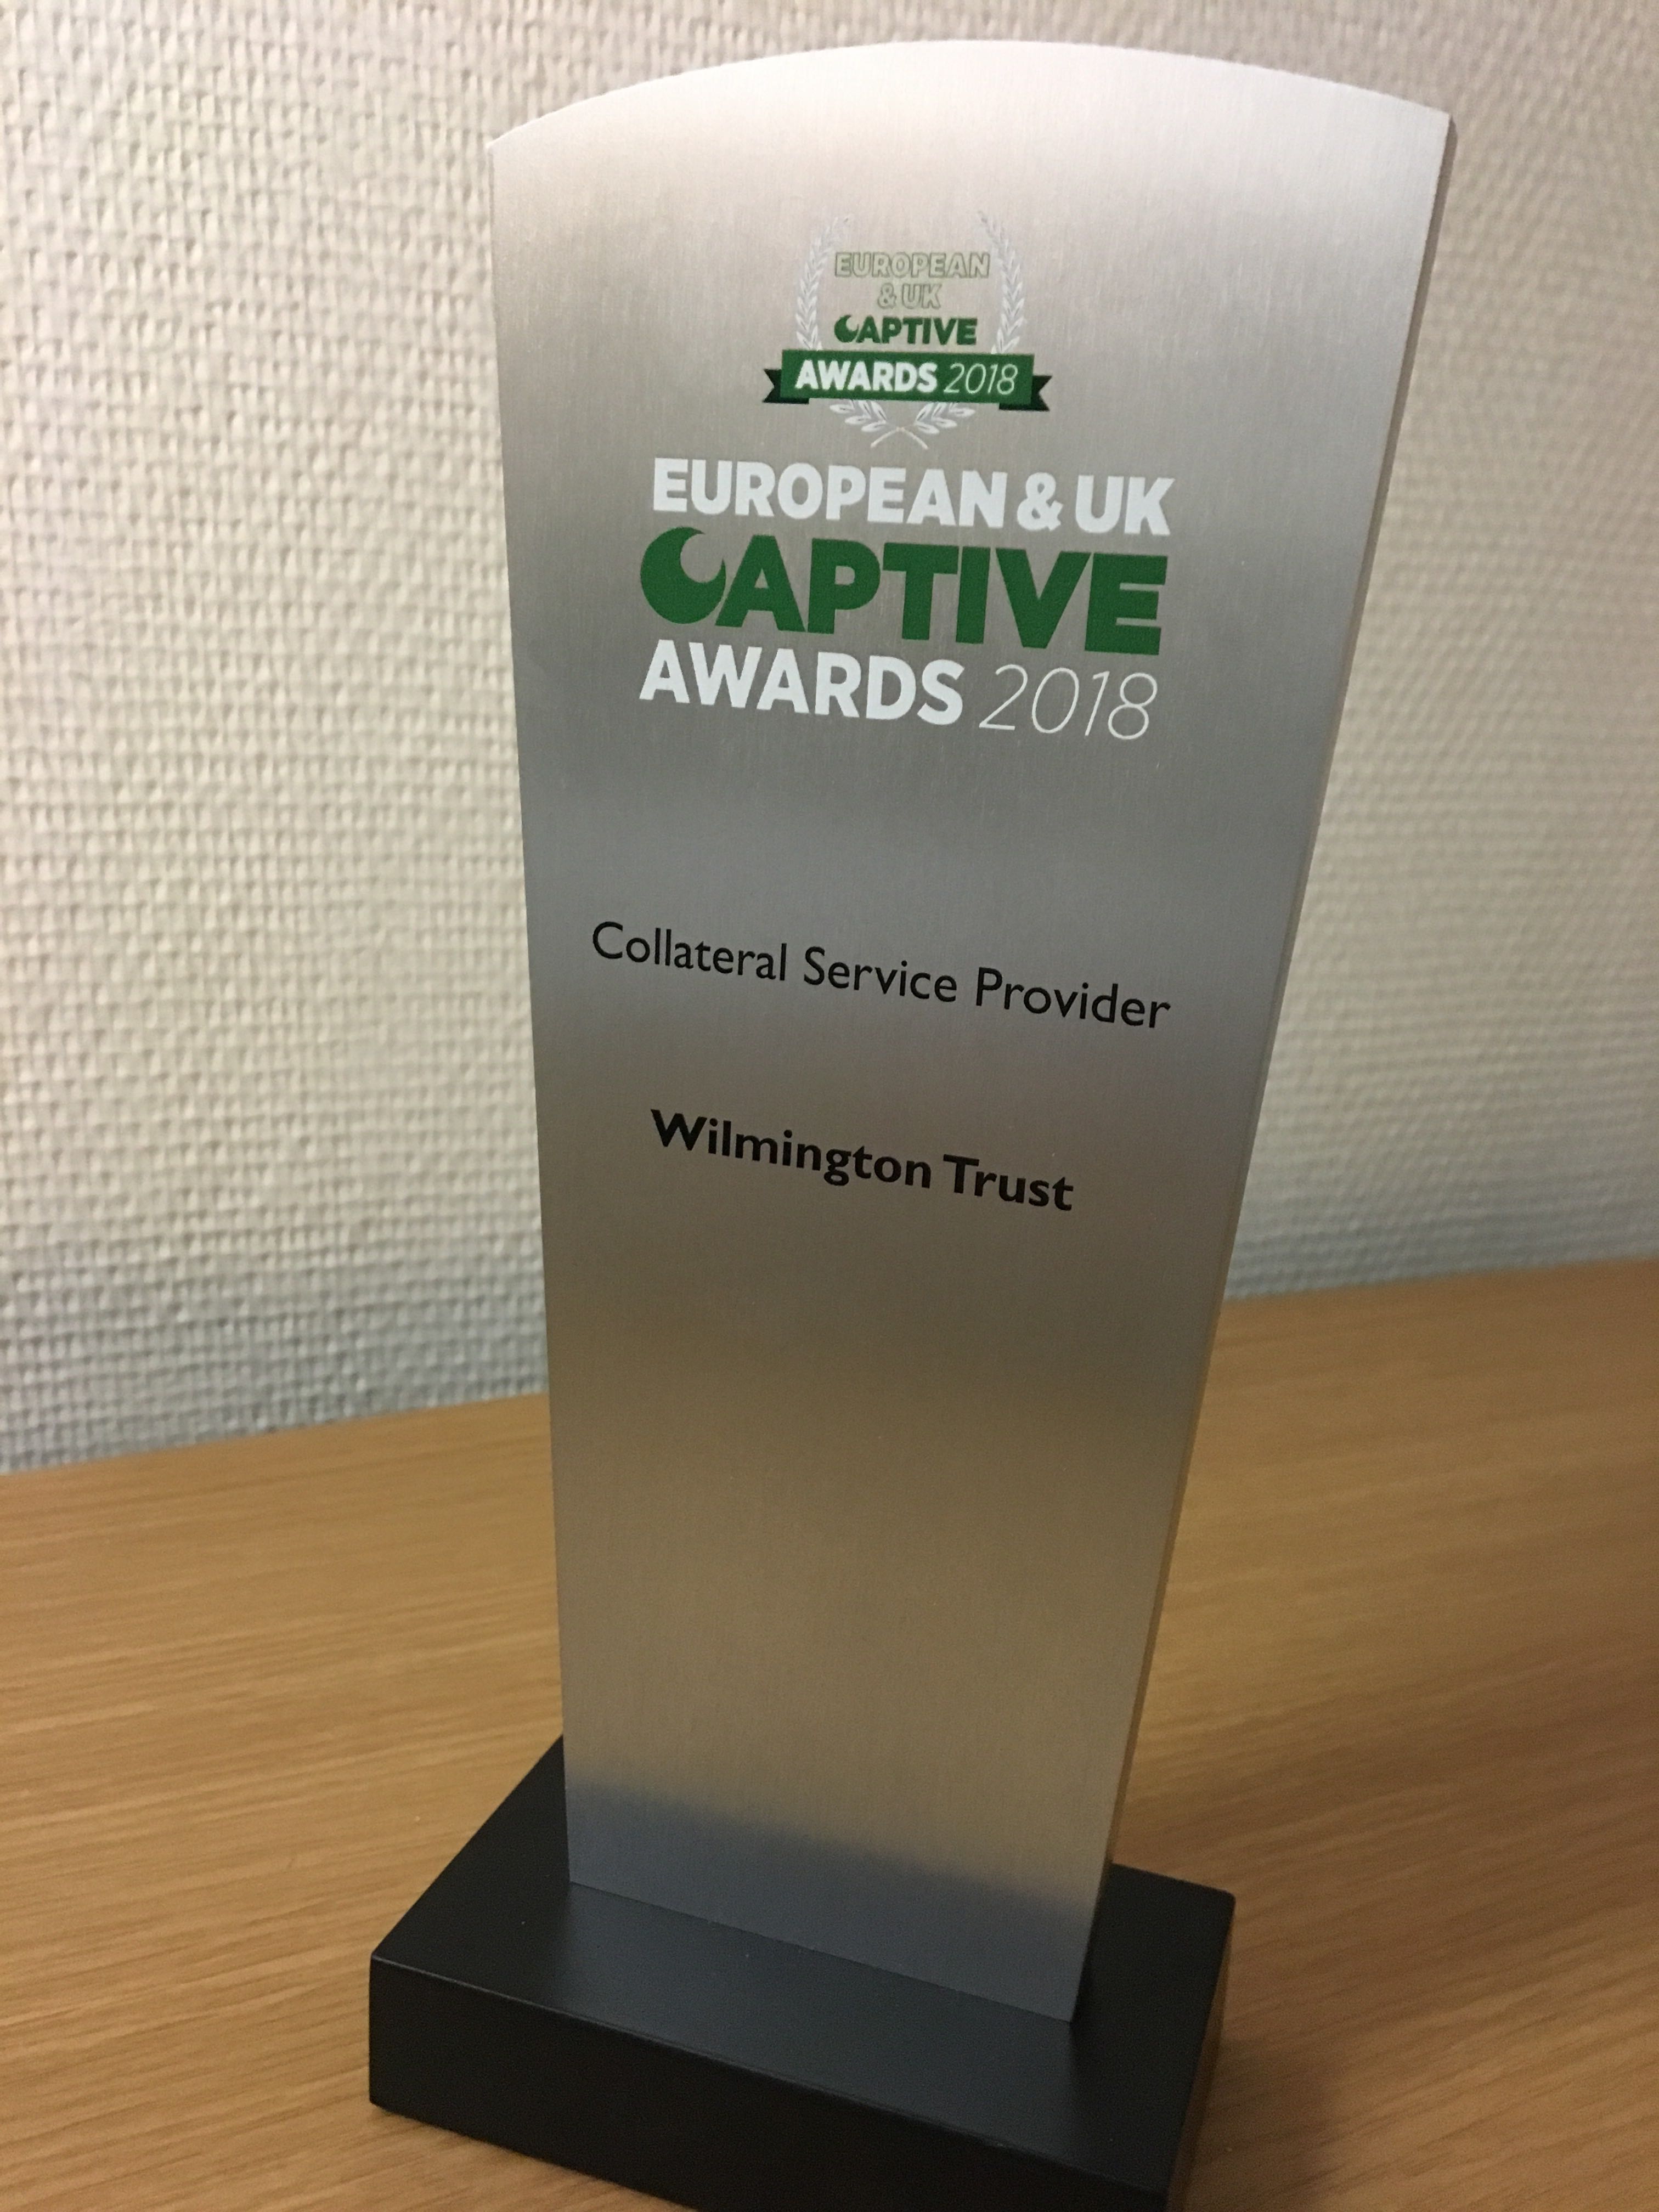 Wilmington Trust received the “Collateral Service Provider of the Year” award at the 2018 European & UK Captive Review Awards.